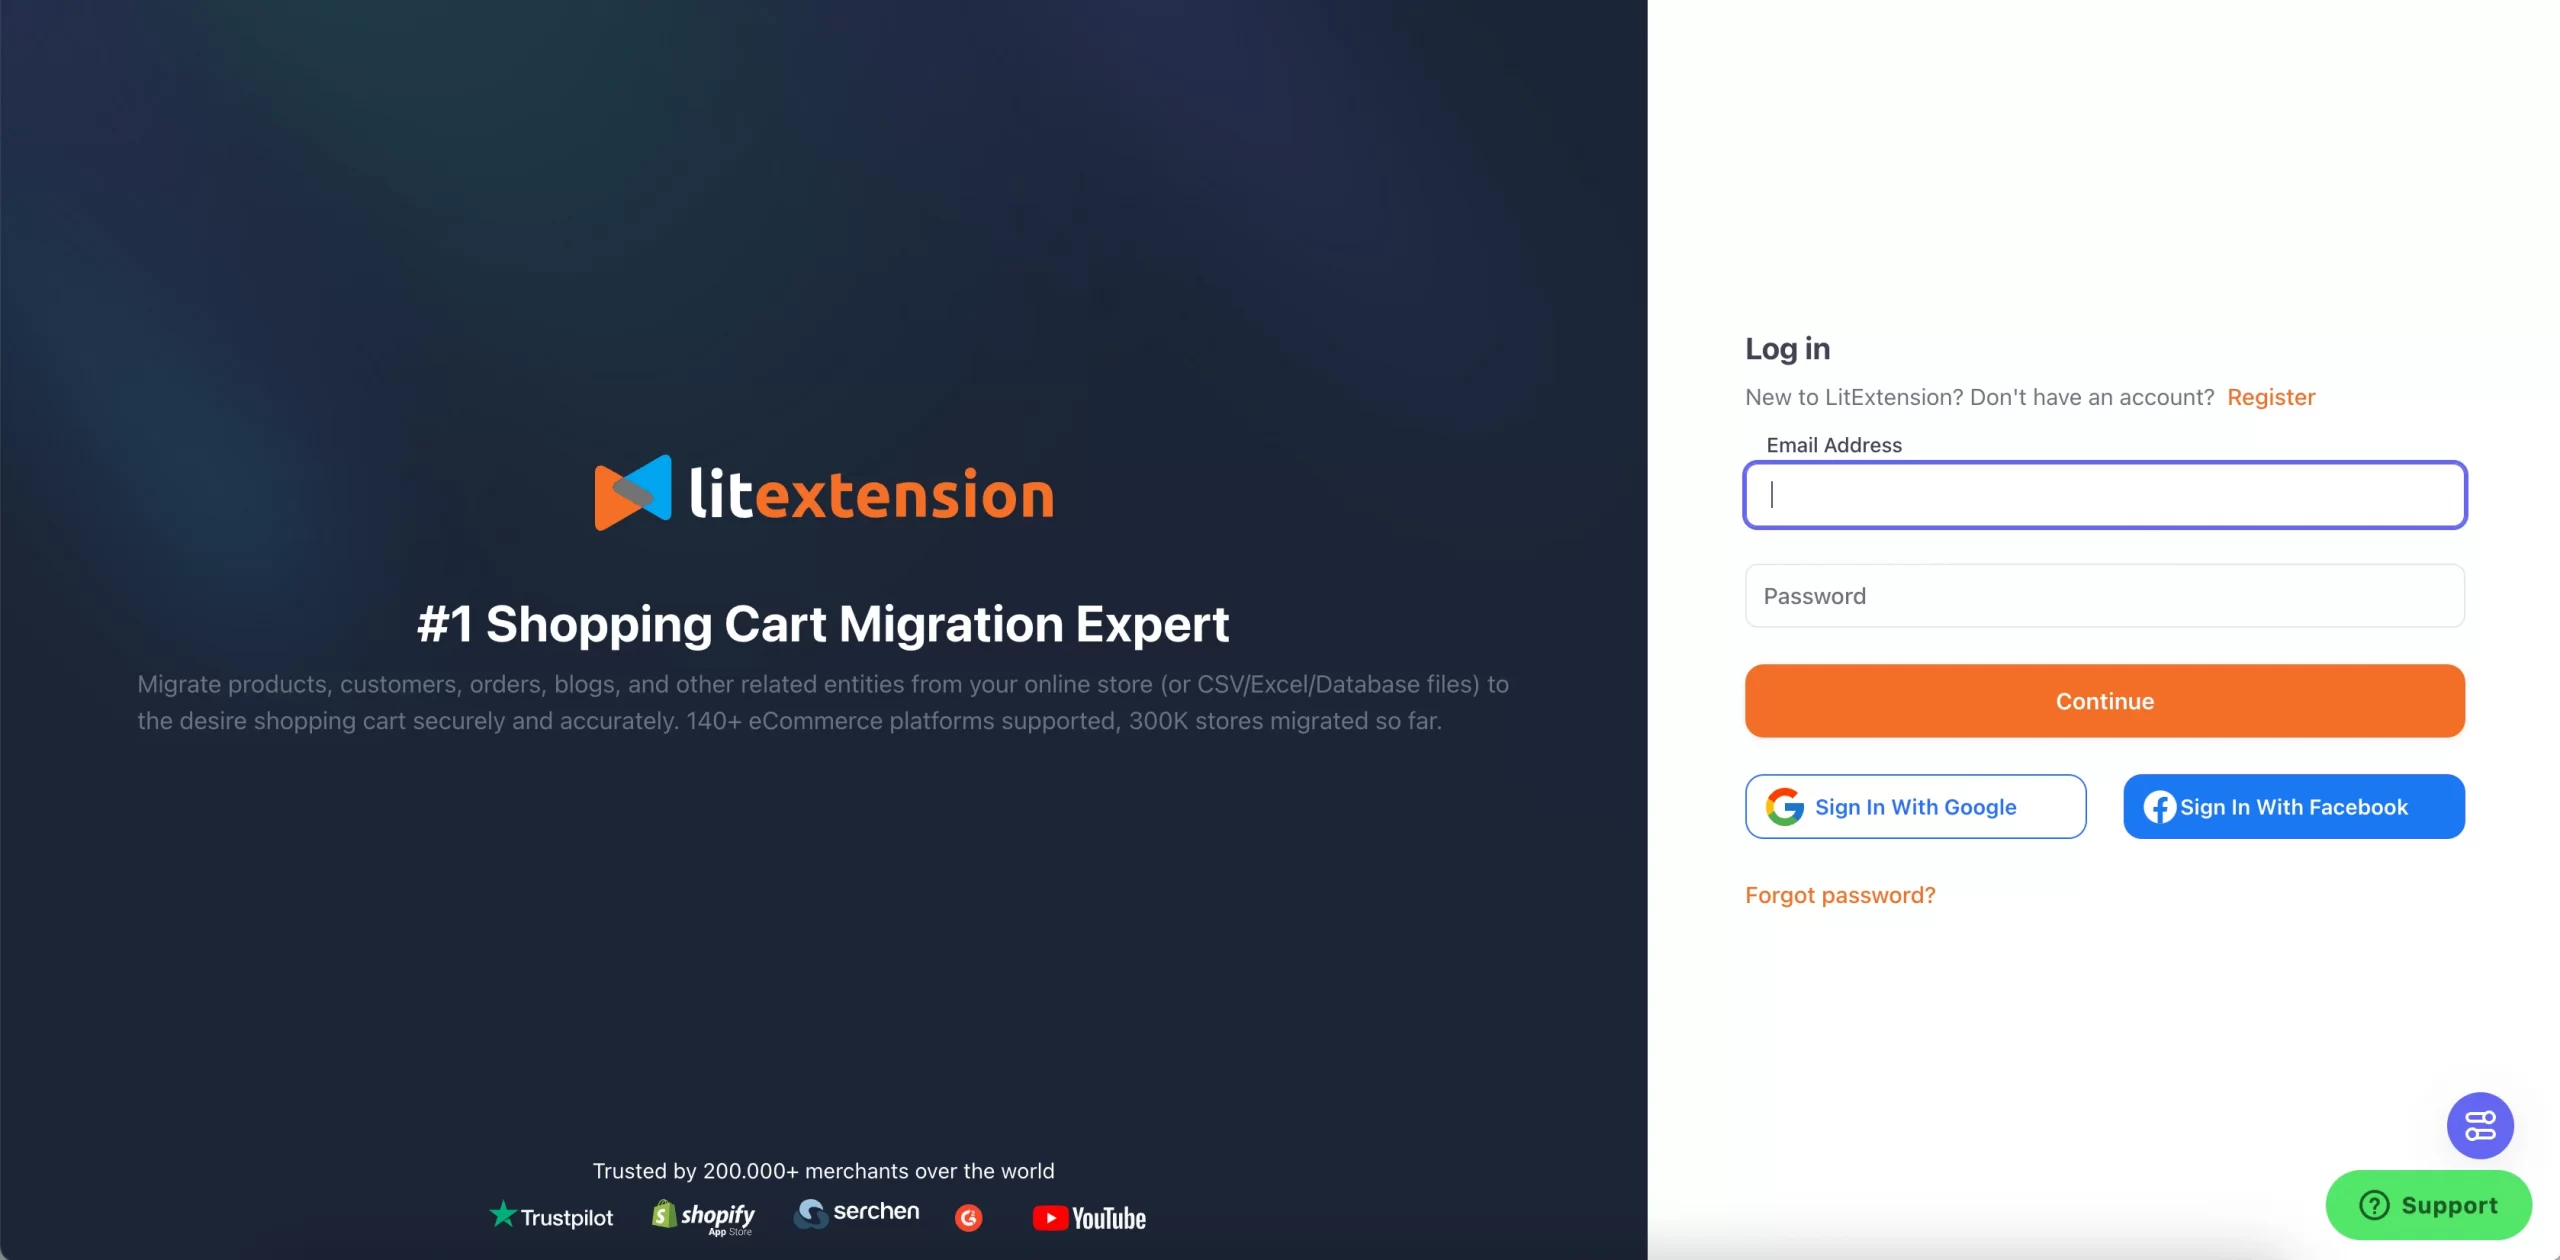 Log in to LitExtension